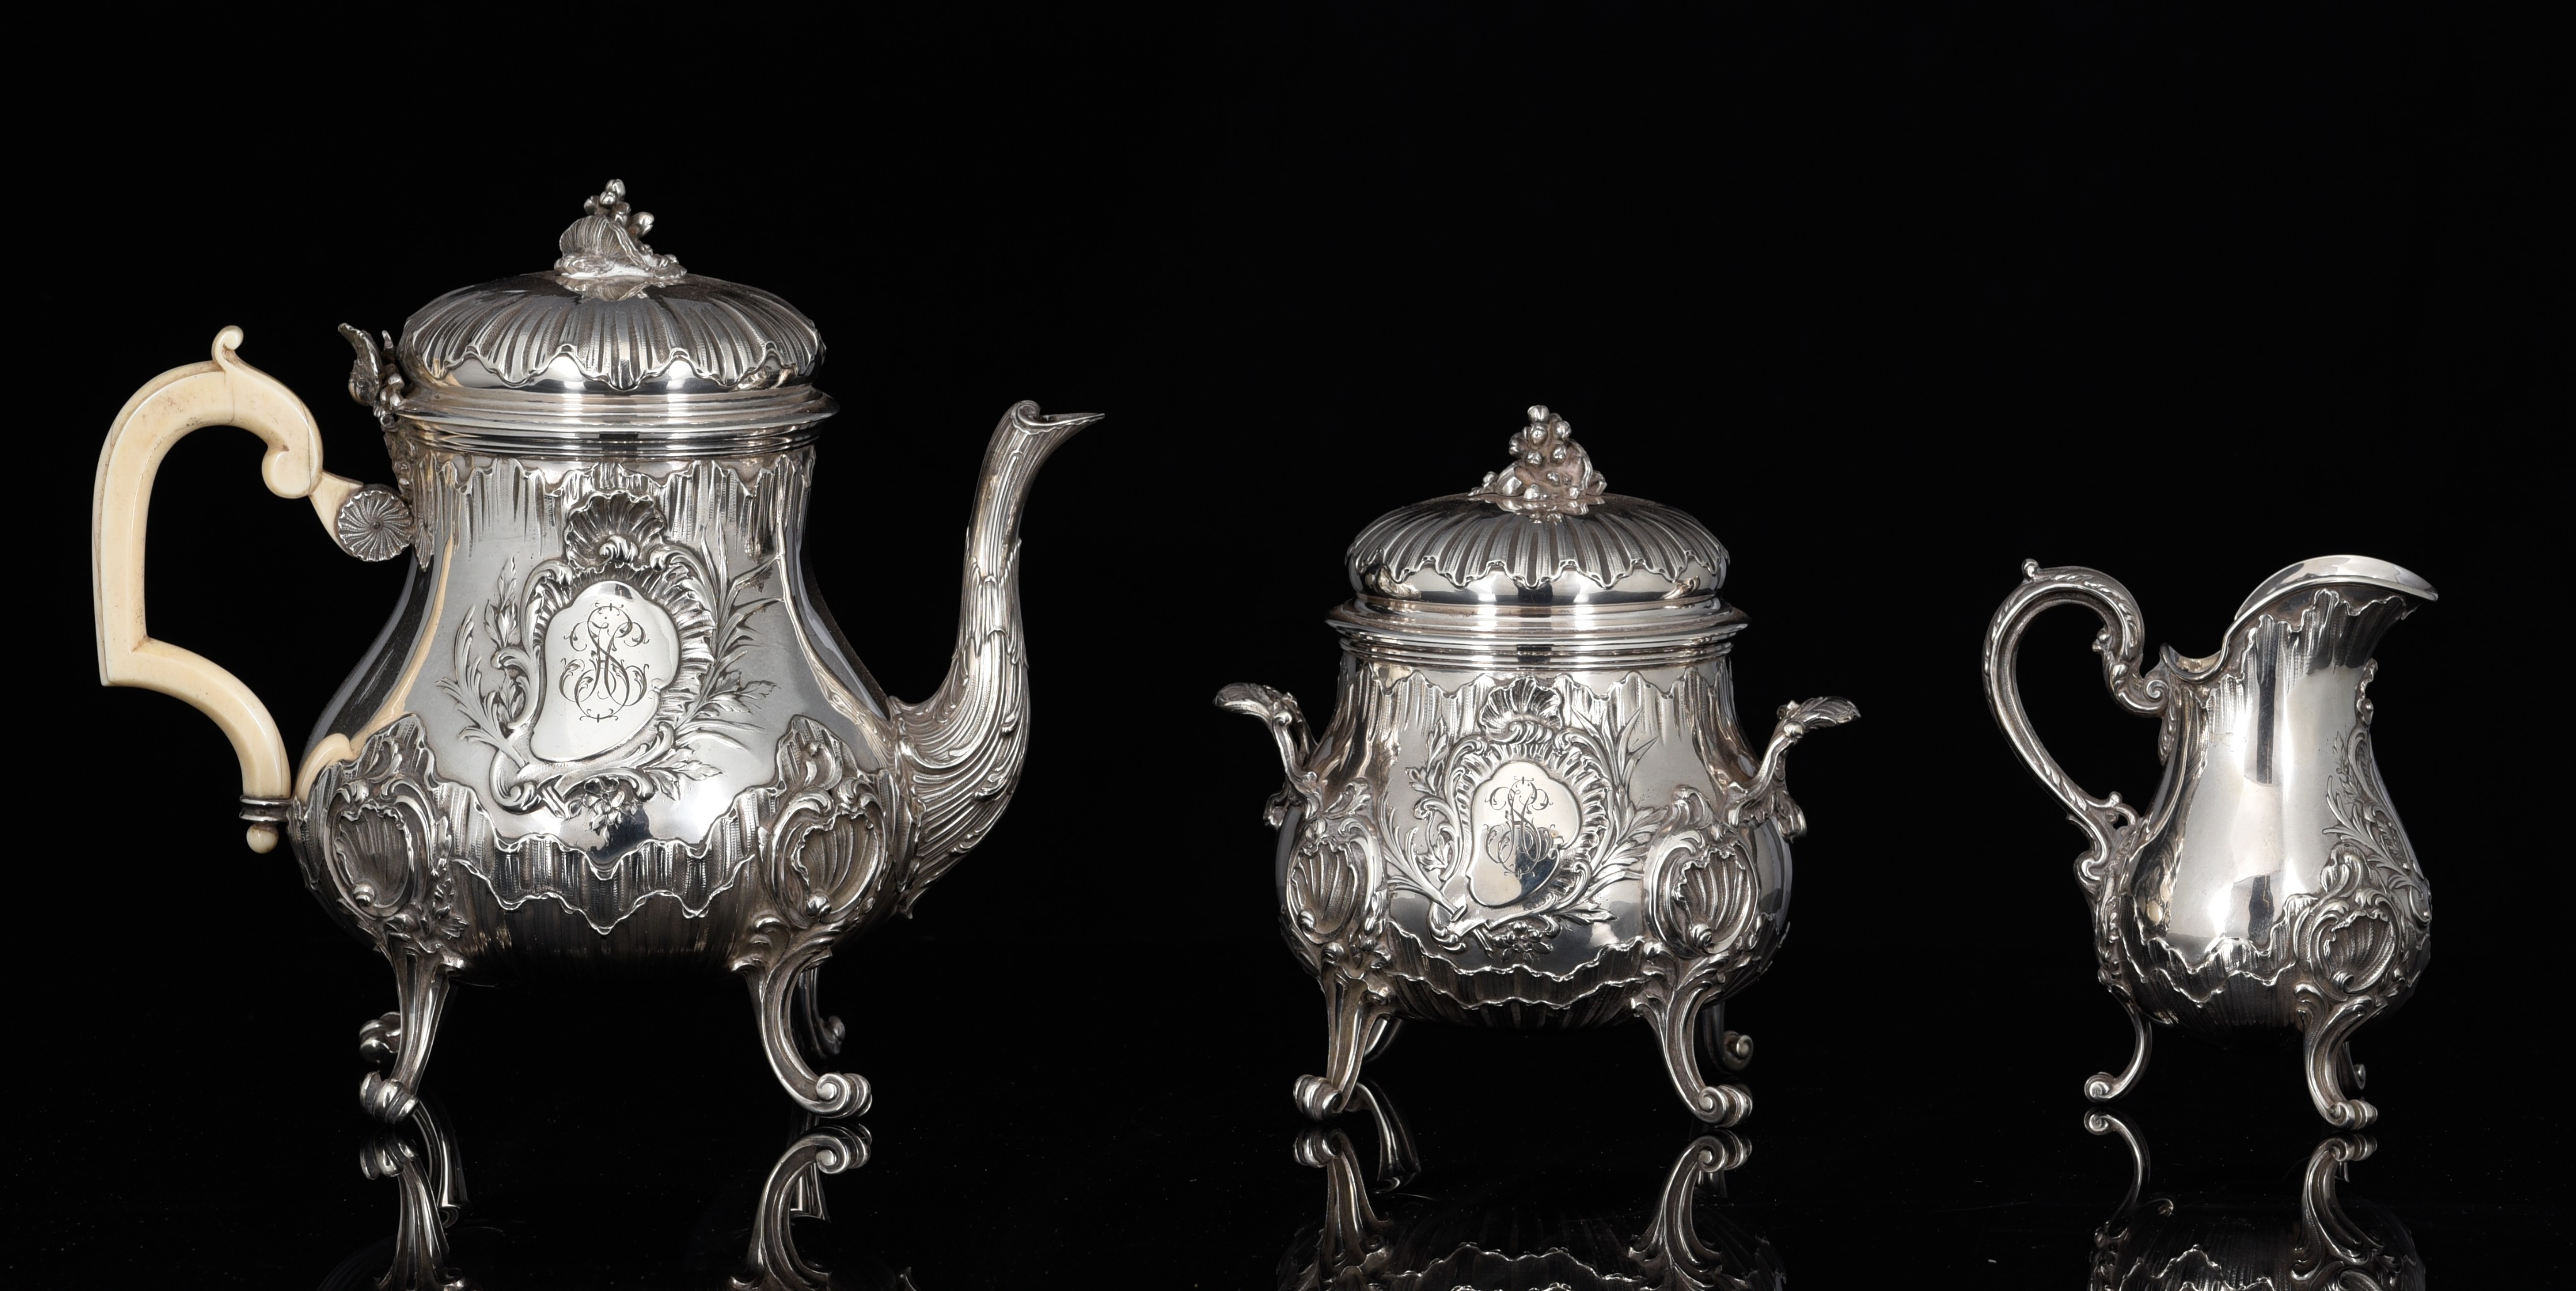 A French three-part silver Rococo Revival coffee set, 950/000, H 13,5 - 22,5 cm, c 1980 g - Image 2 of 7